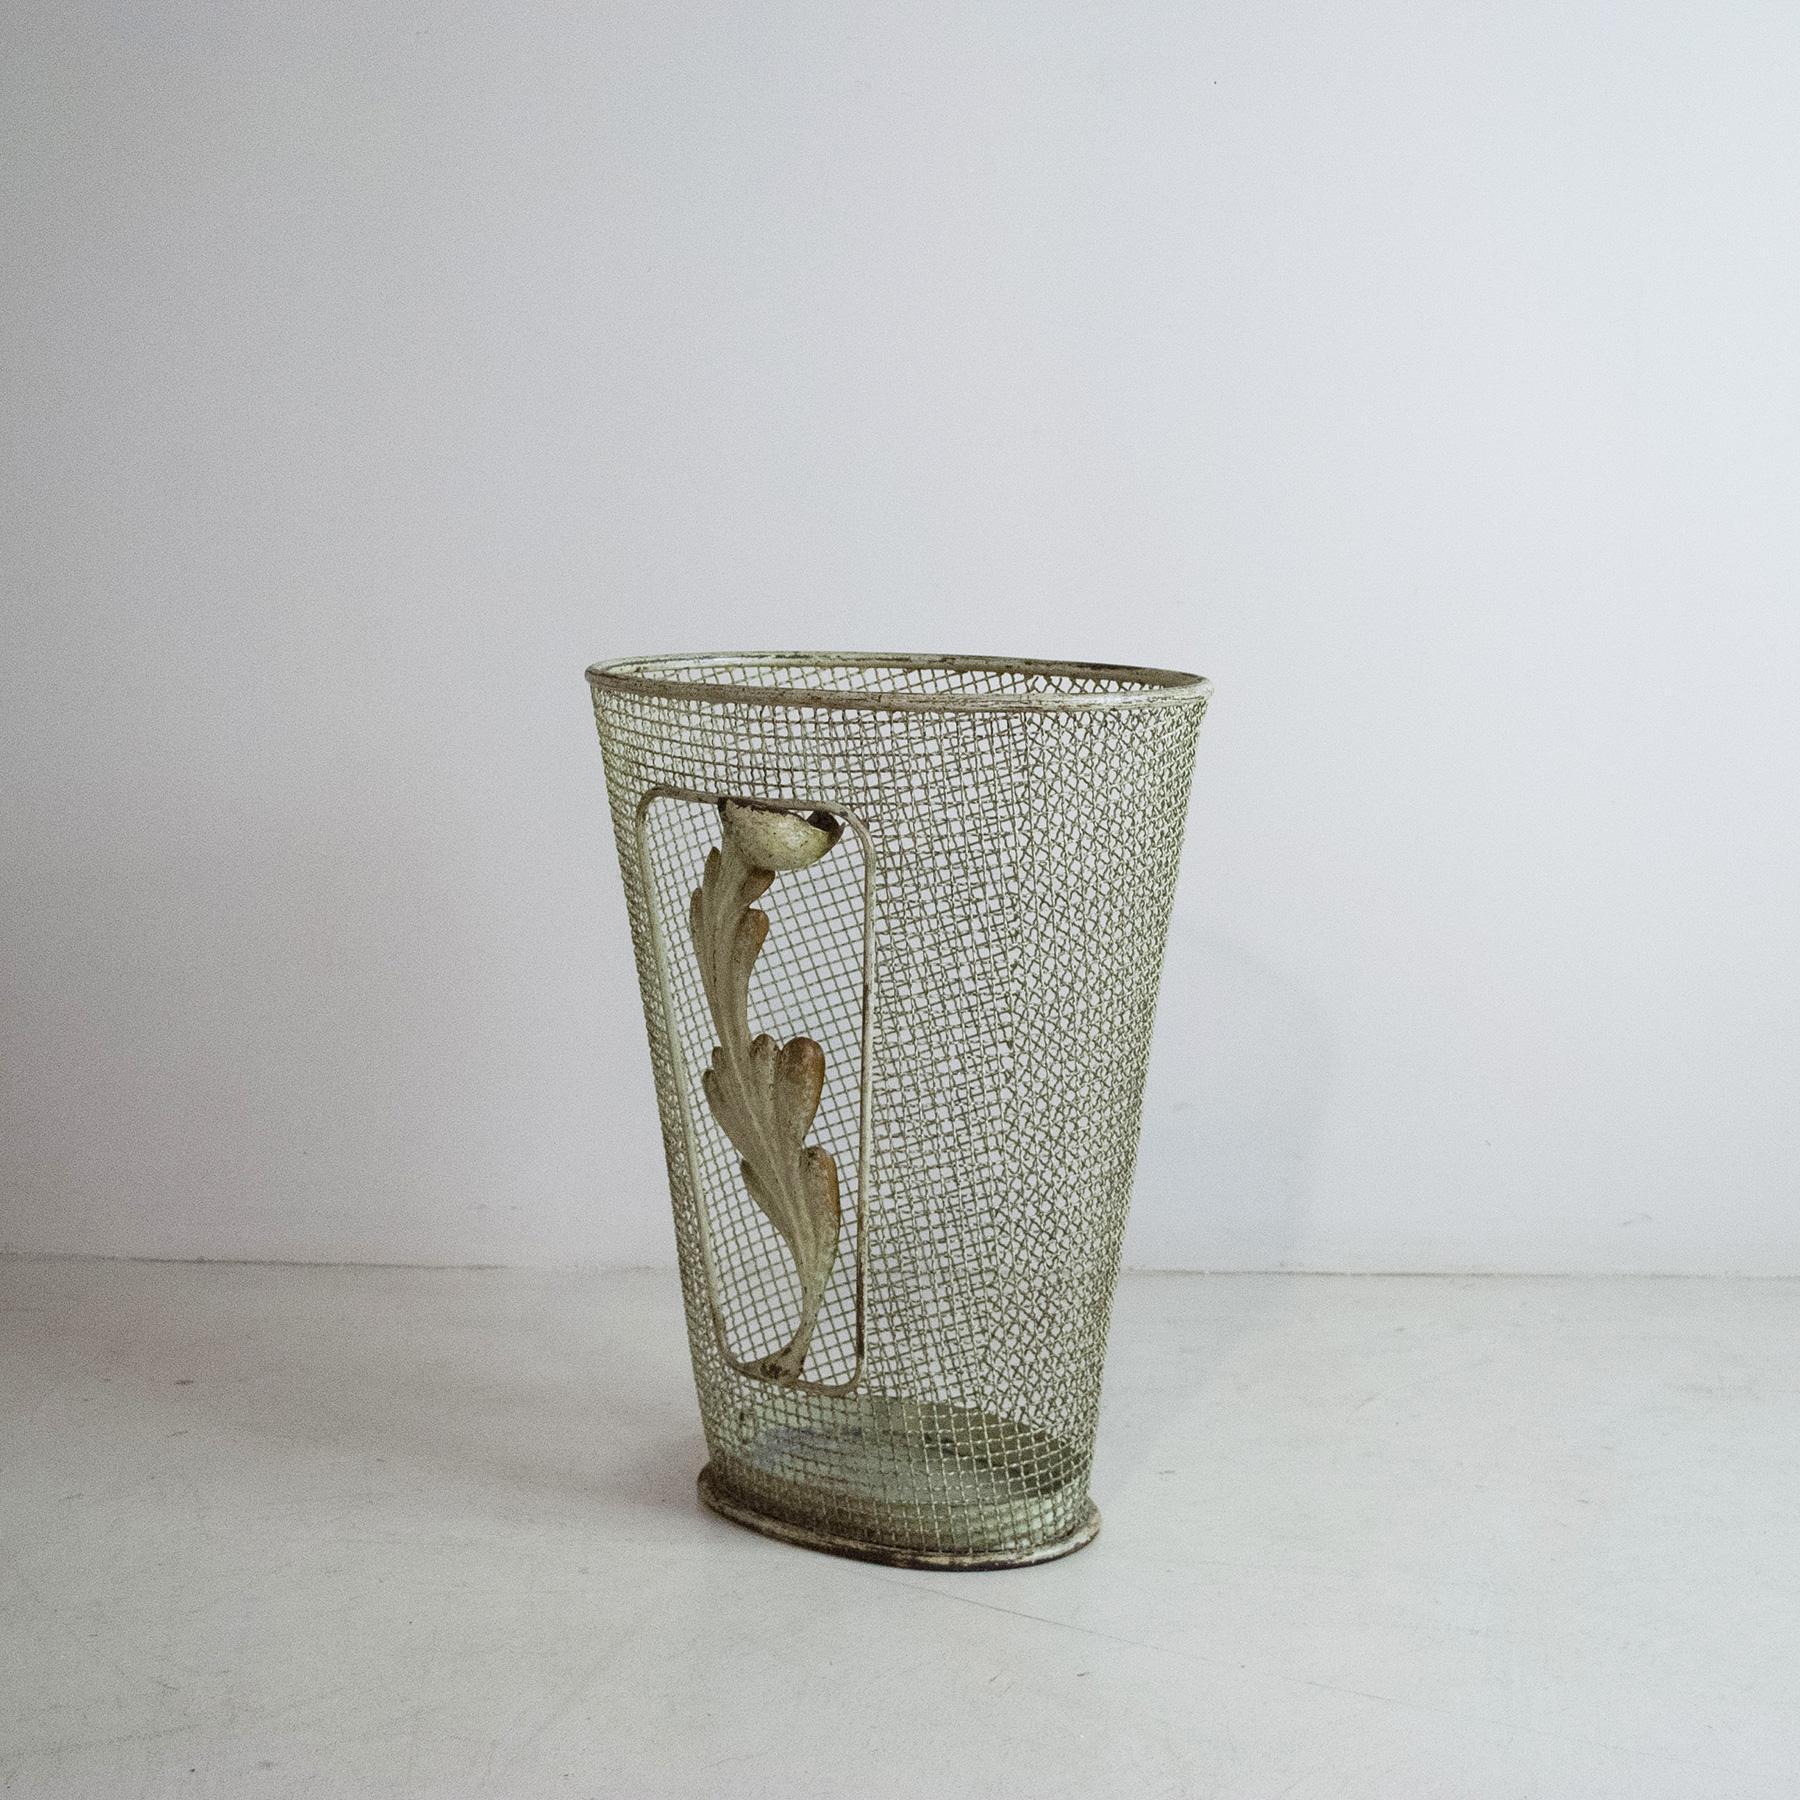 Grid-worked metal umbrella stand embellished with a metal leaf decorated in the Gio Ponti style, late 1950s production.